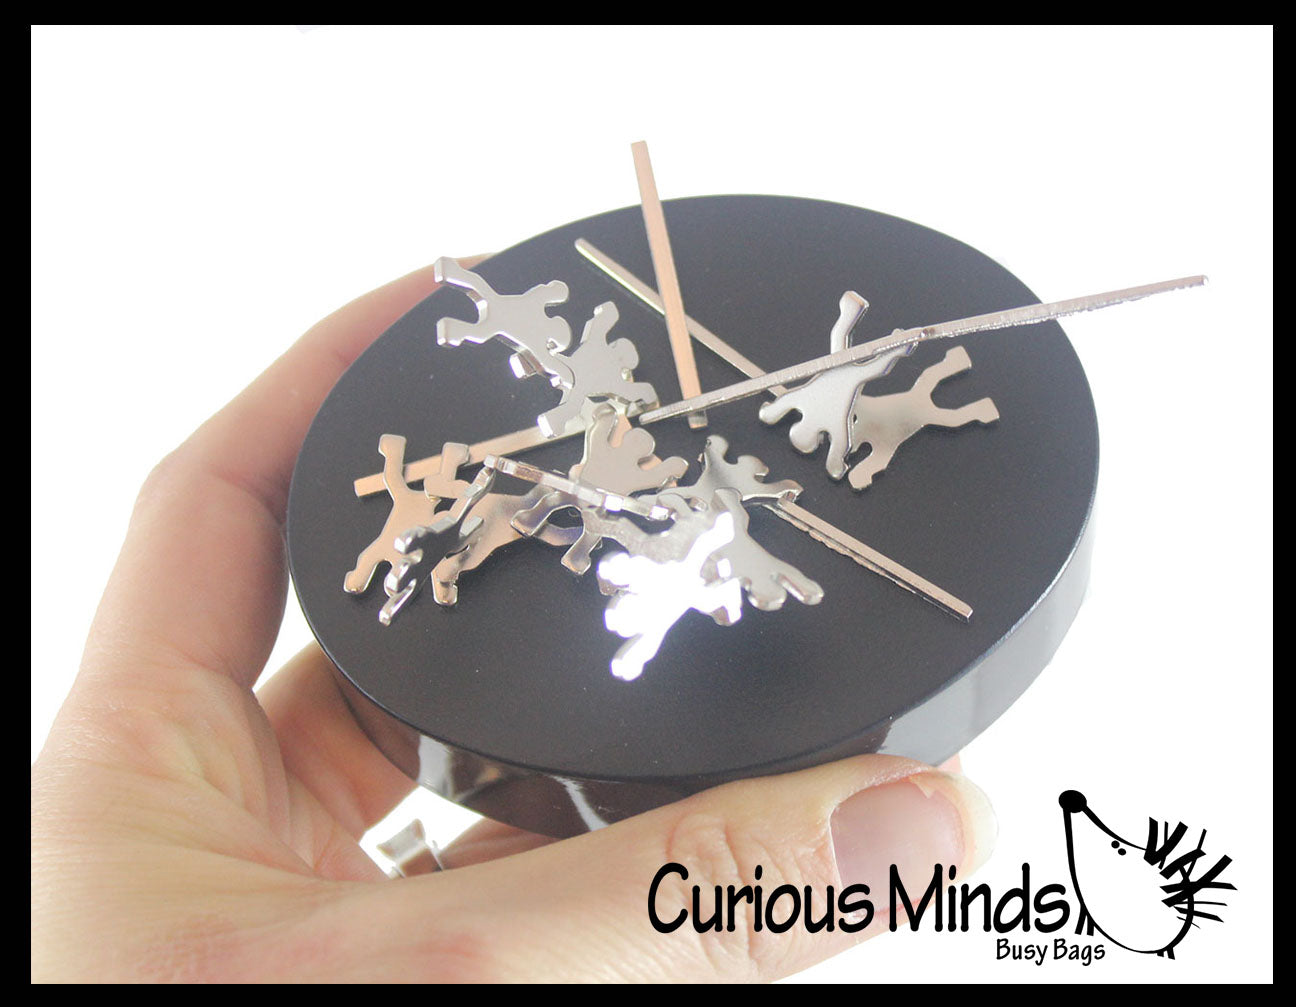 Magnetic Fidget Sculpture - Office Science Toy - Desk Toy with Magnet Base and Metal Pieces